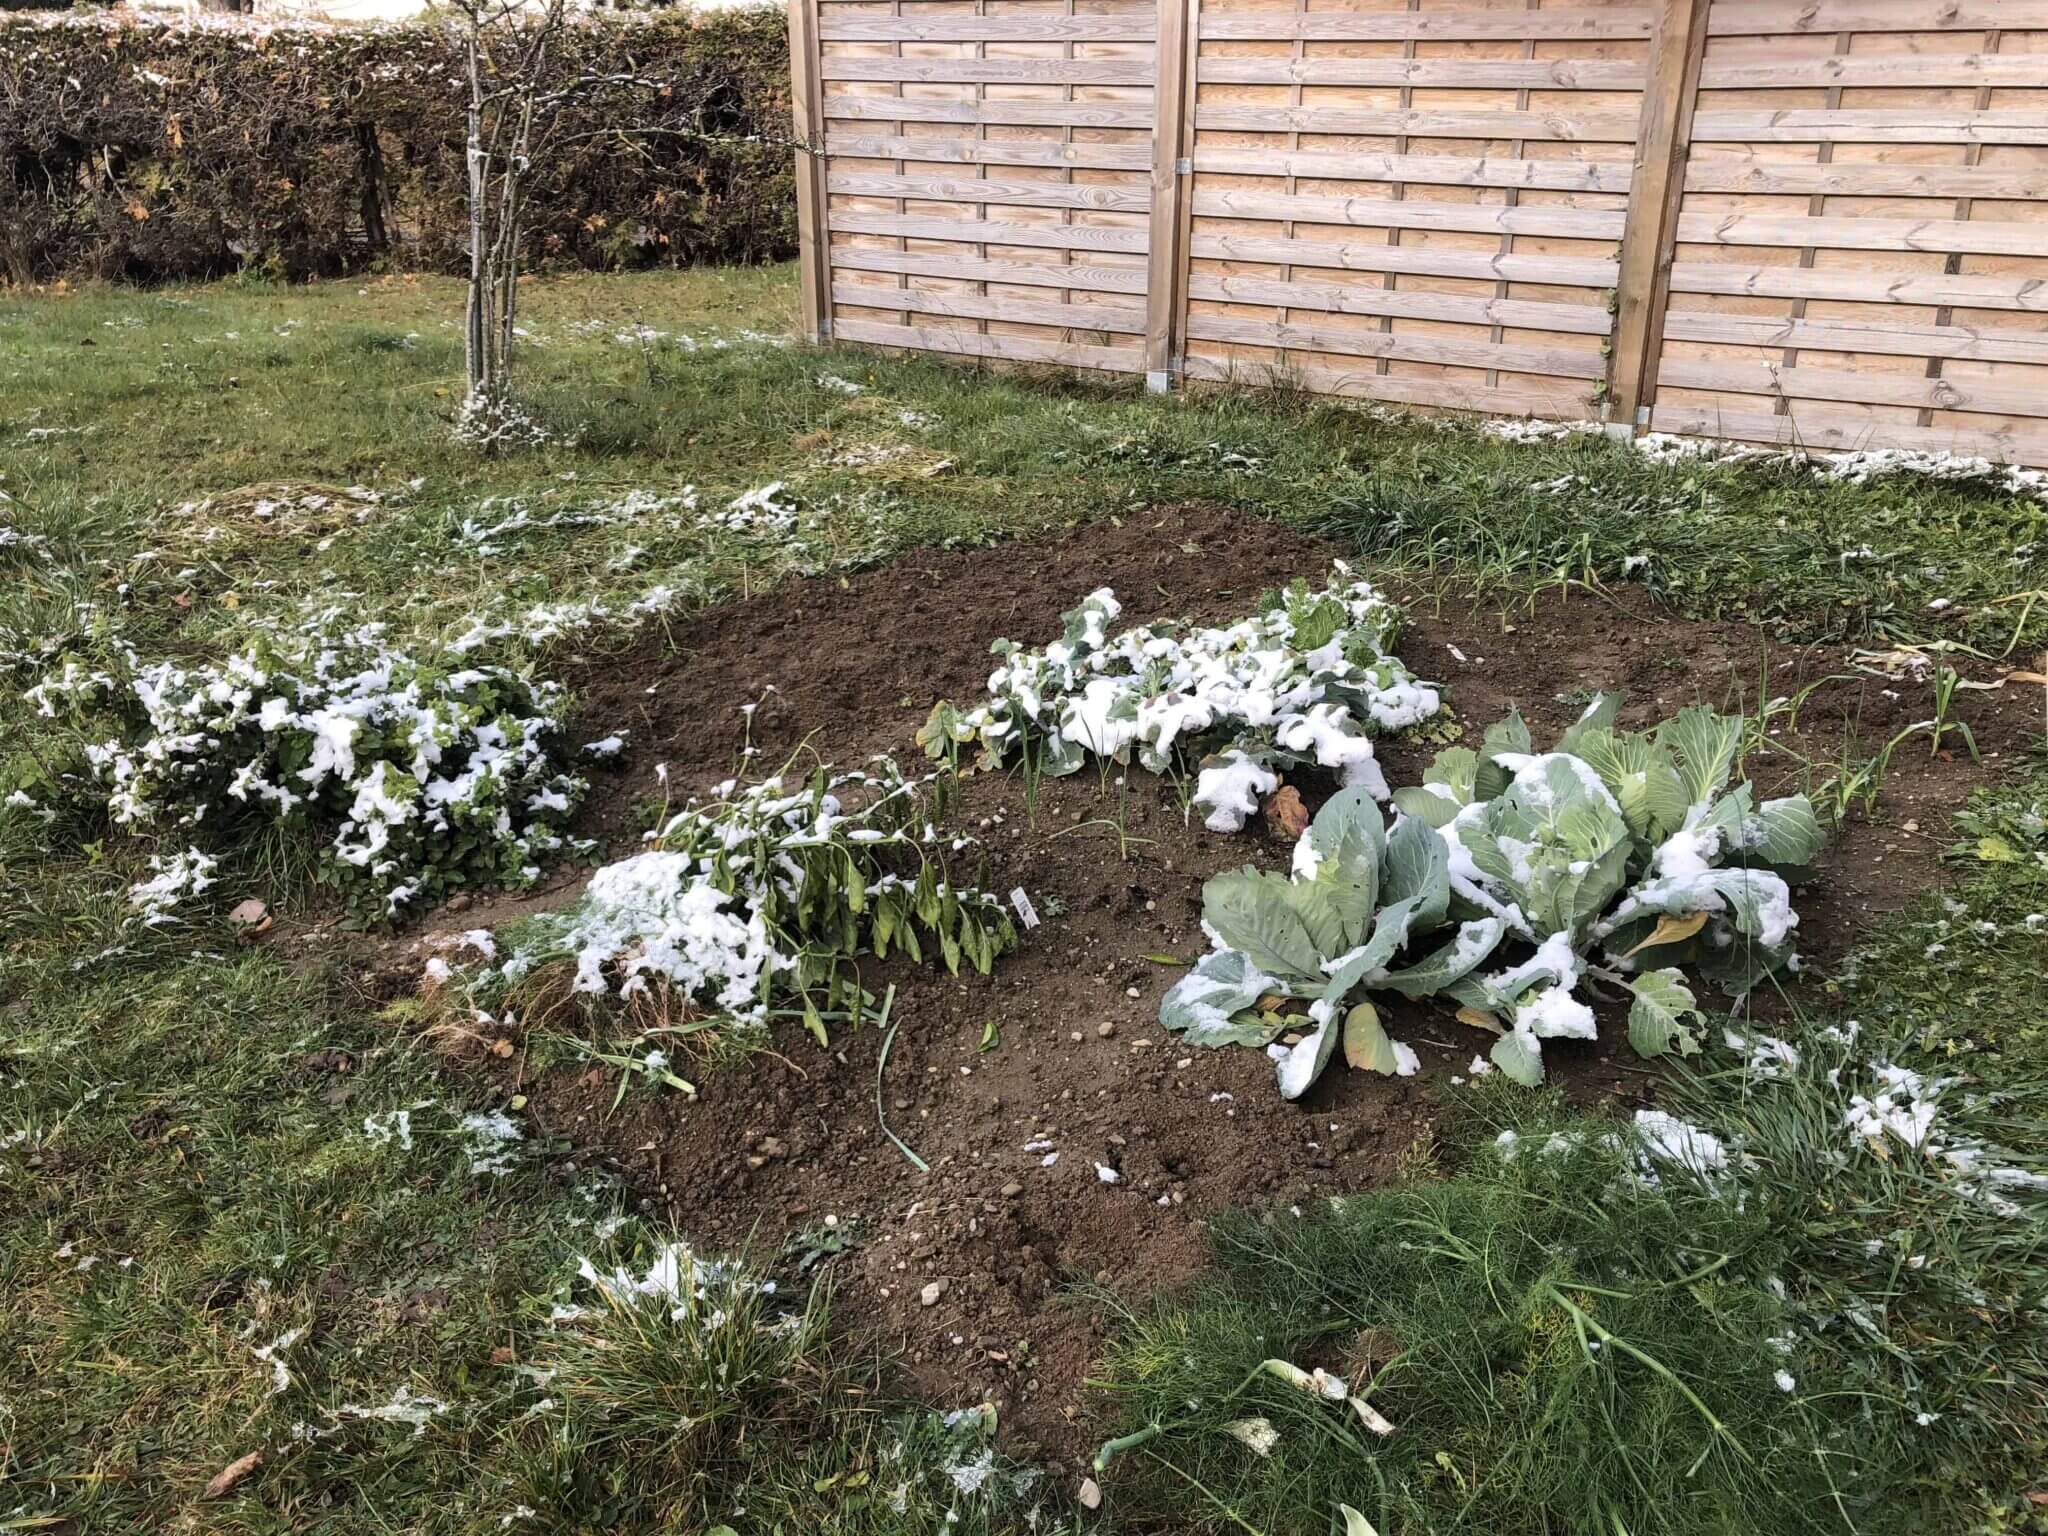 Our vegetable garden at the end of 2018